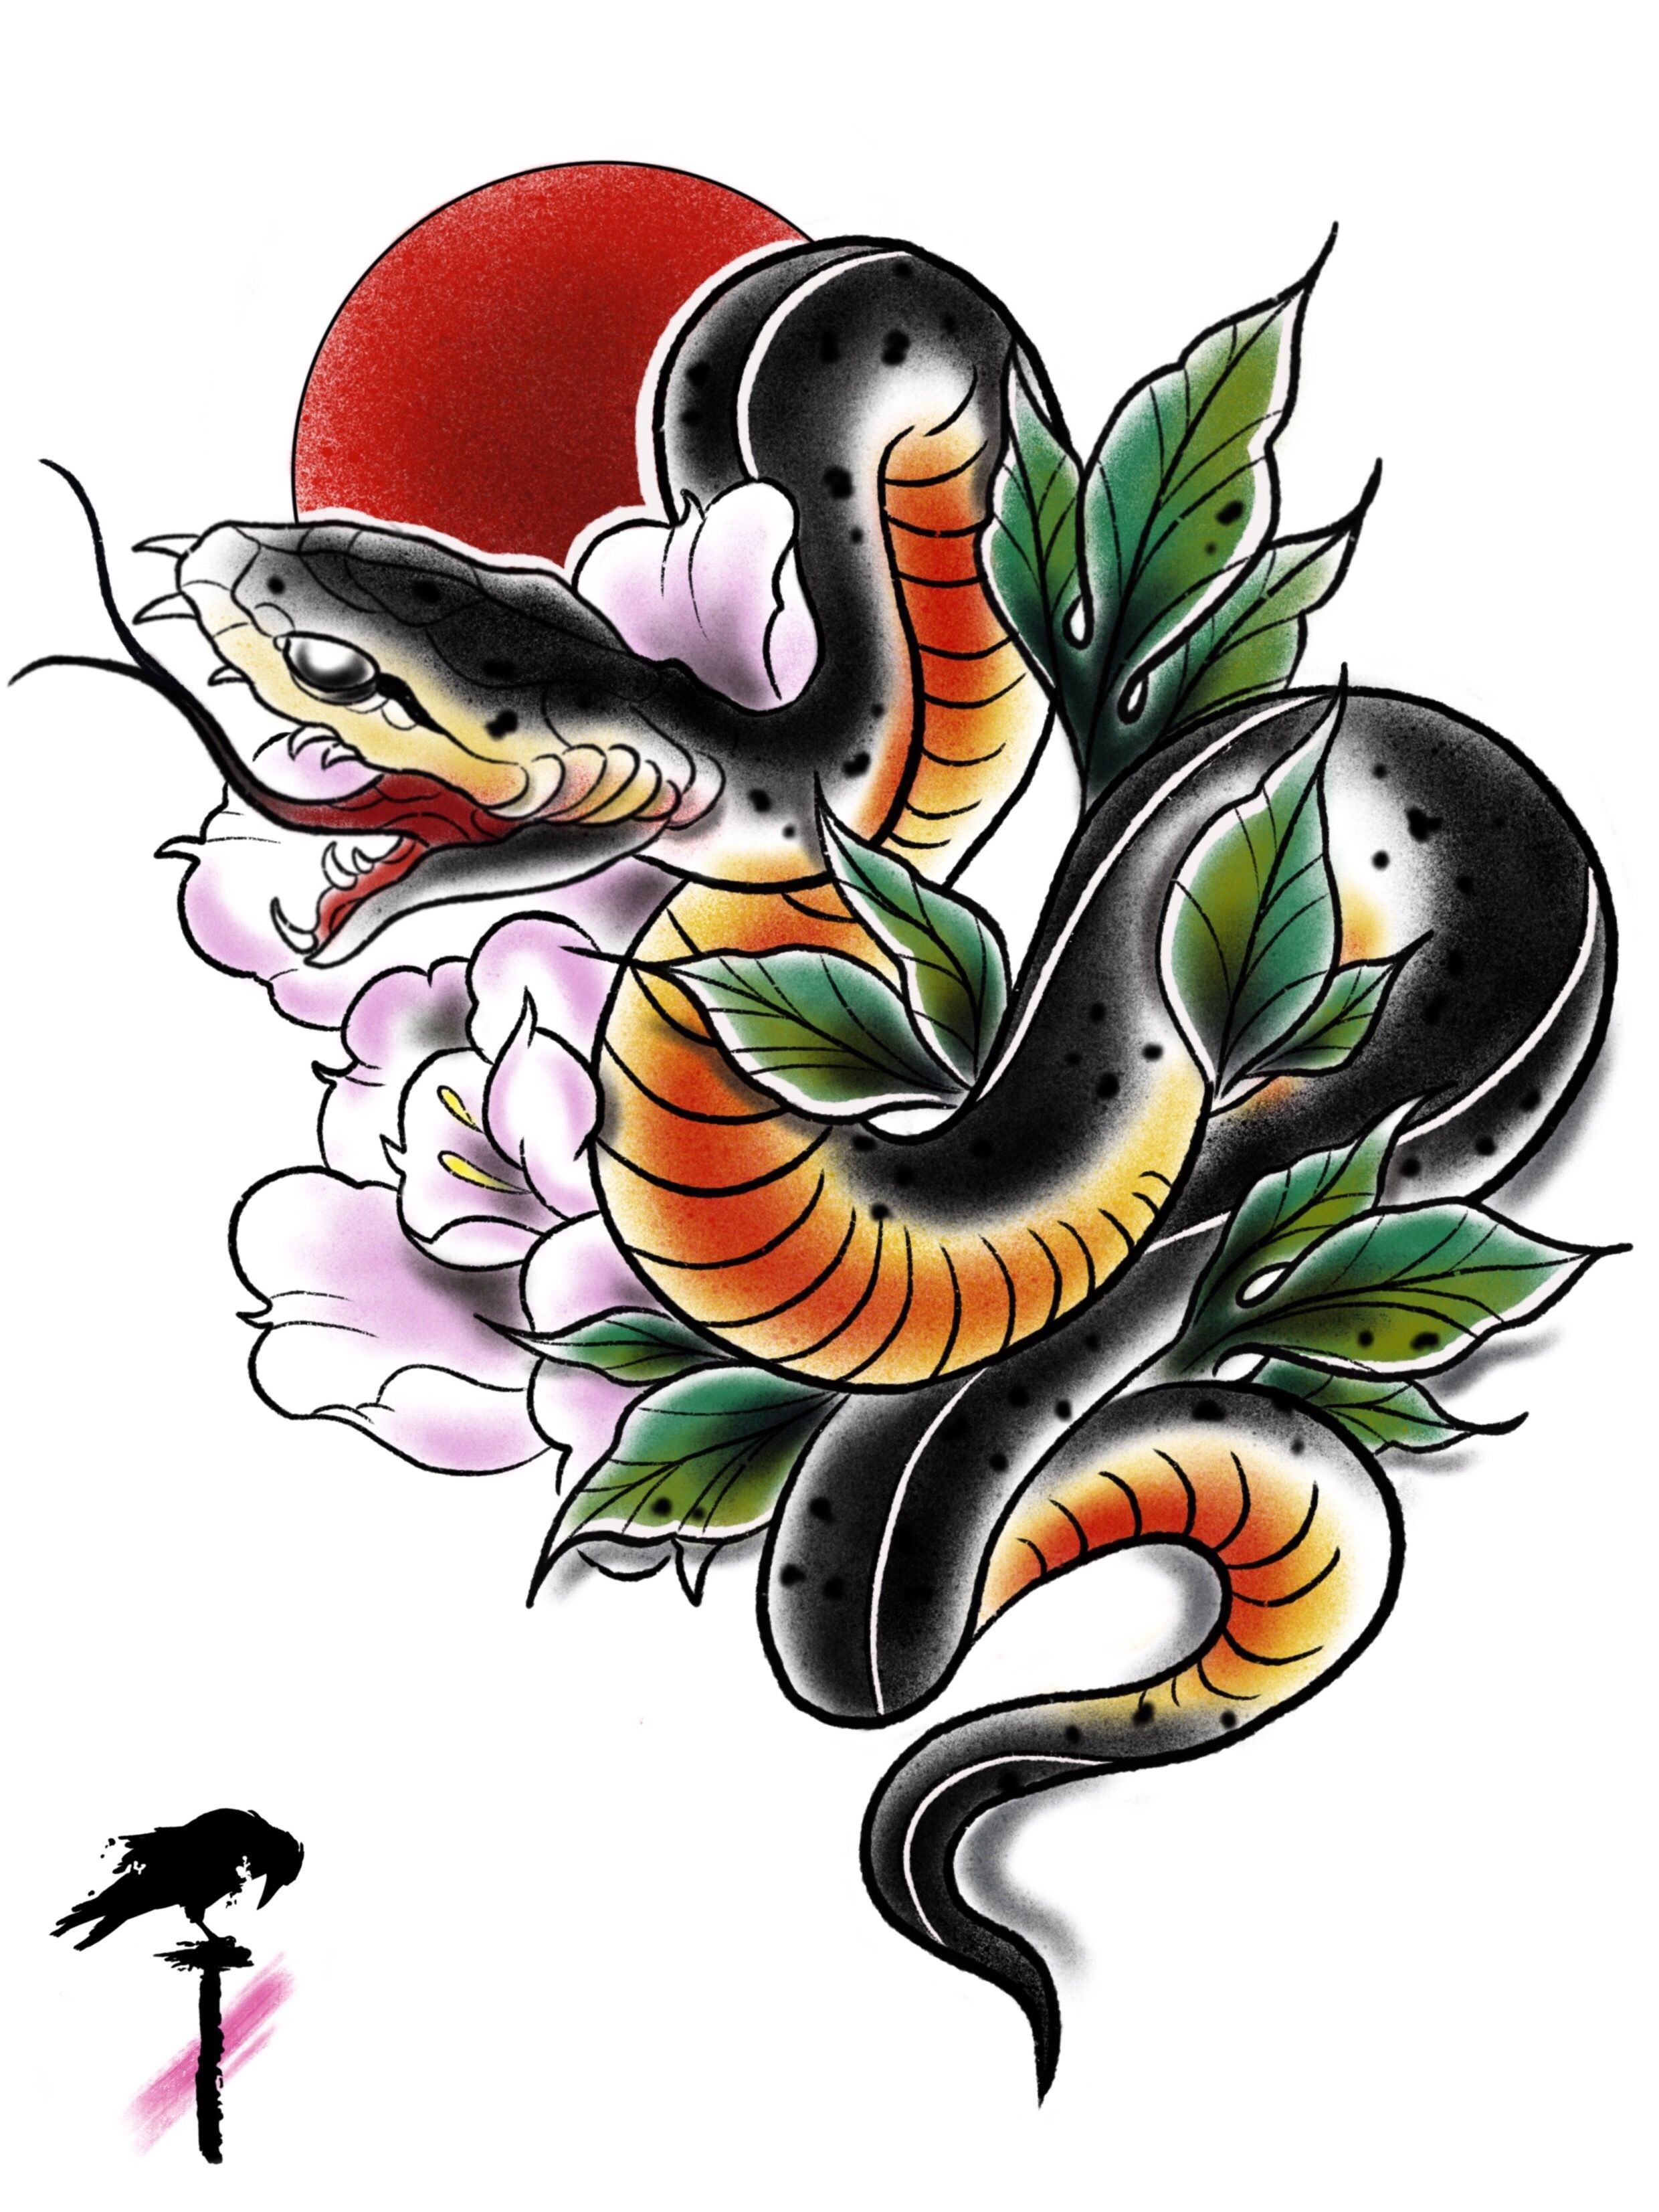 Eternal Tattoos Livonia  Beautiful Japanese snake tattoo done by Dennis  Halbritter Dennis H is in the shop Saturday through Wednesday  Facebook